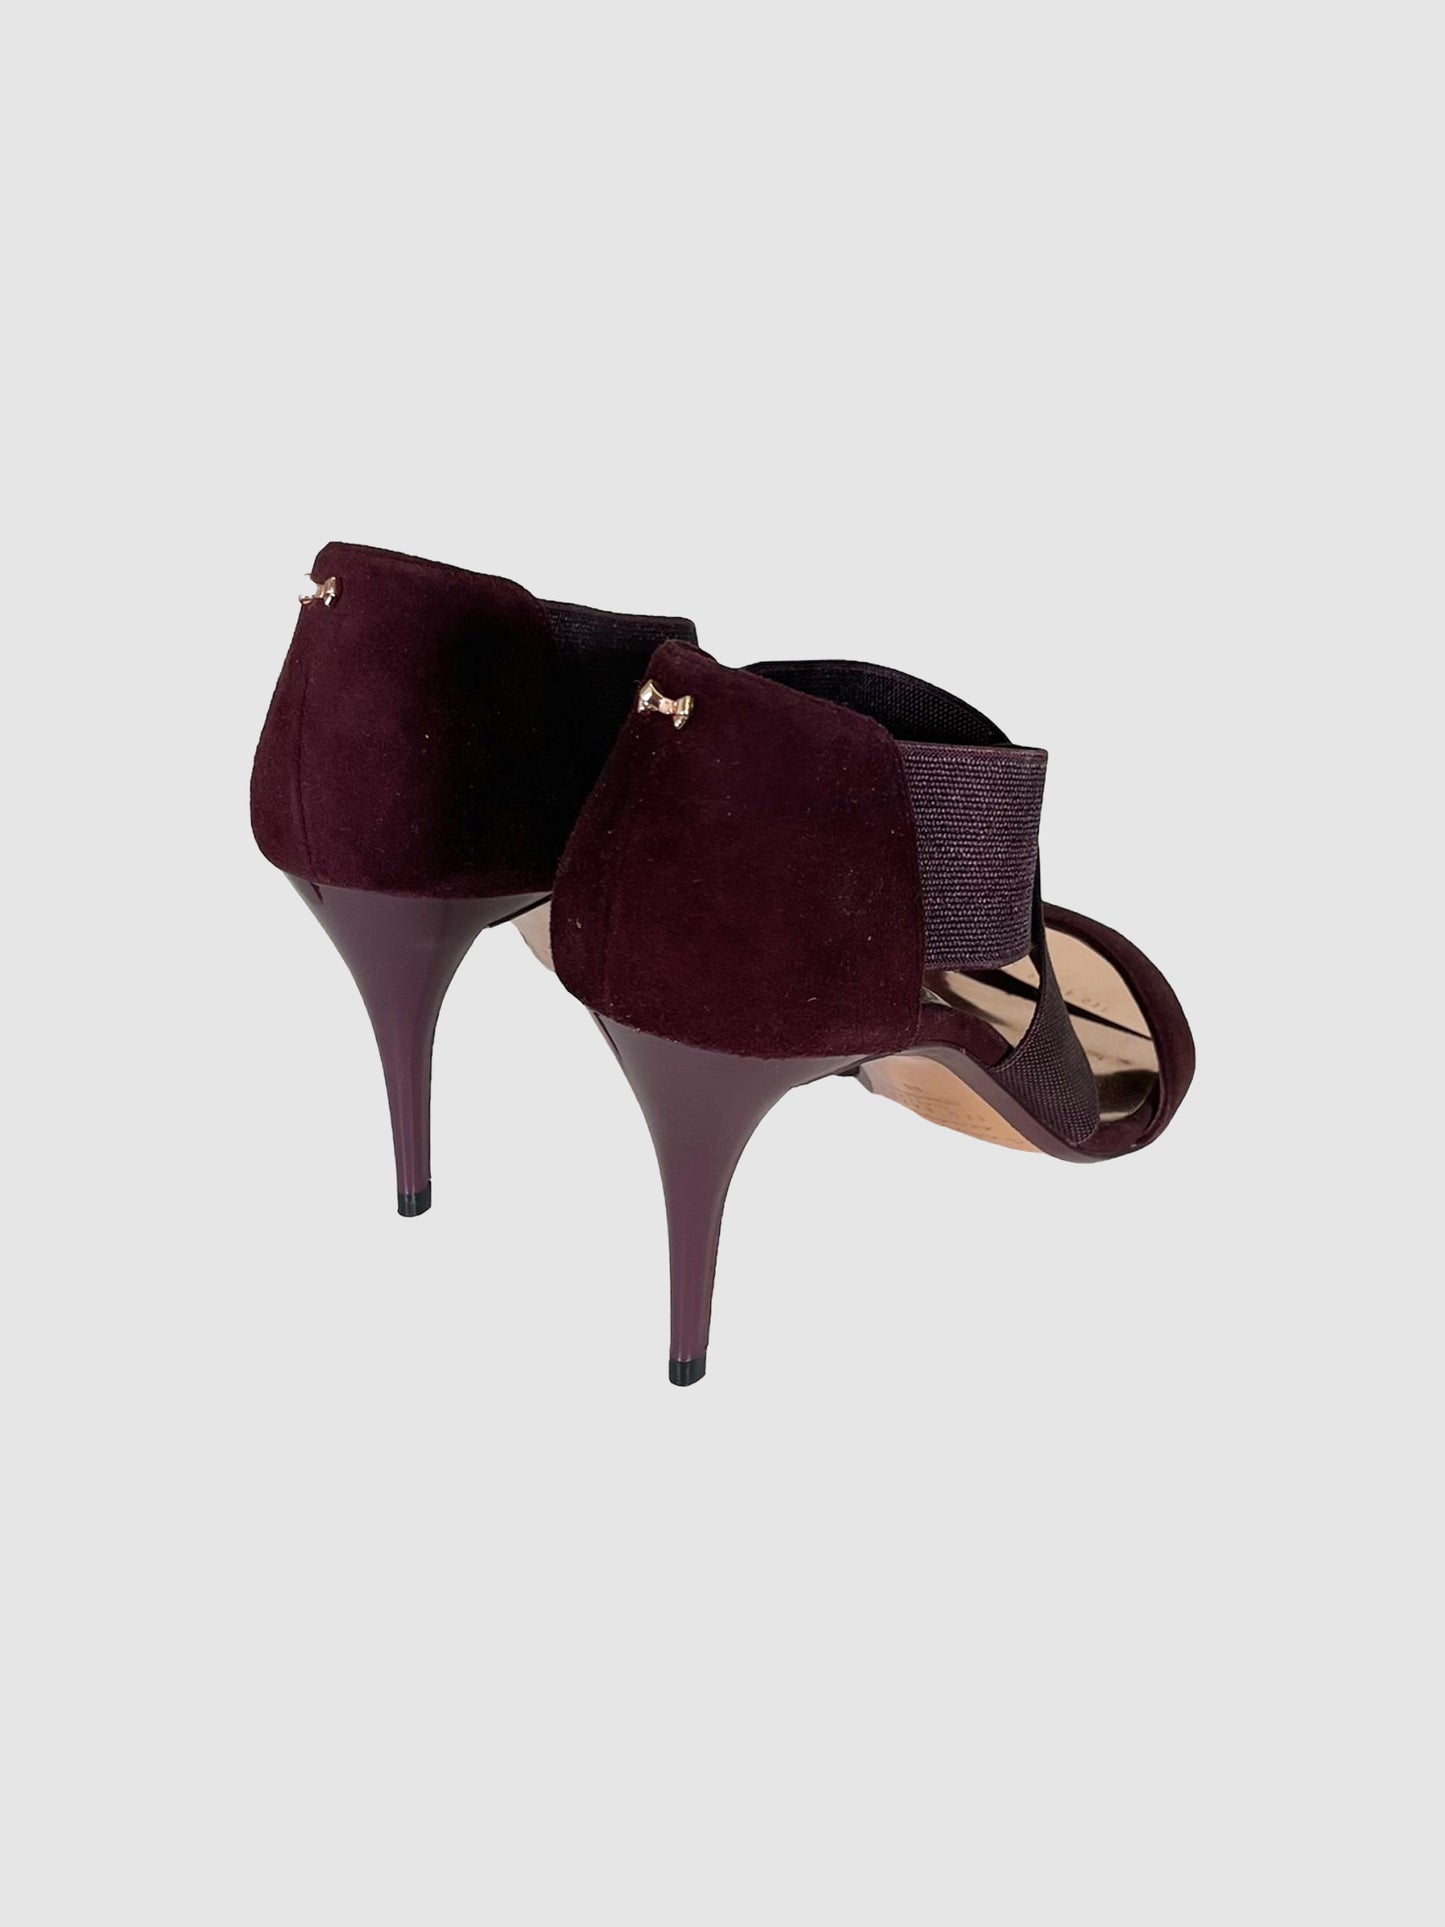 Ted Baker Strappy Stiletto Heels - Size 38